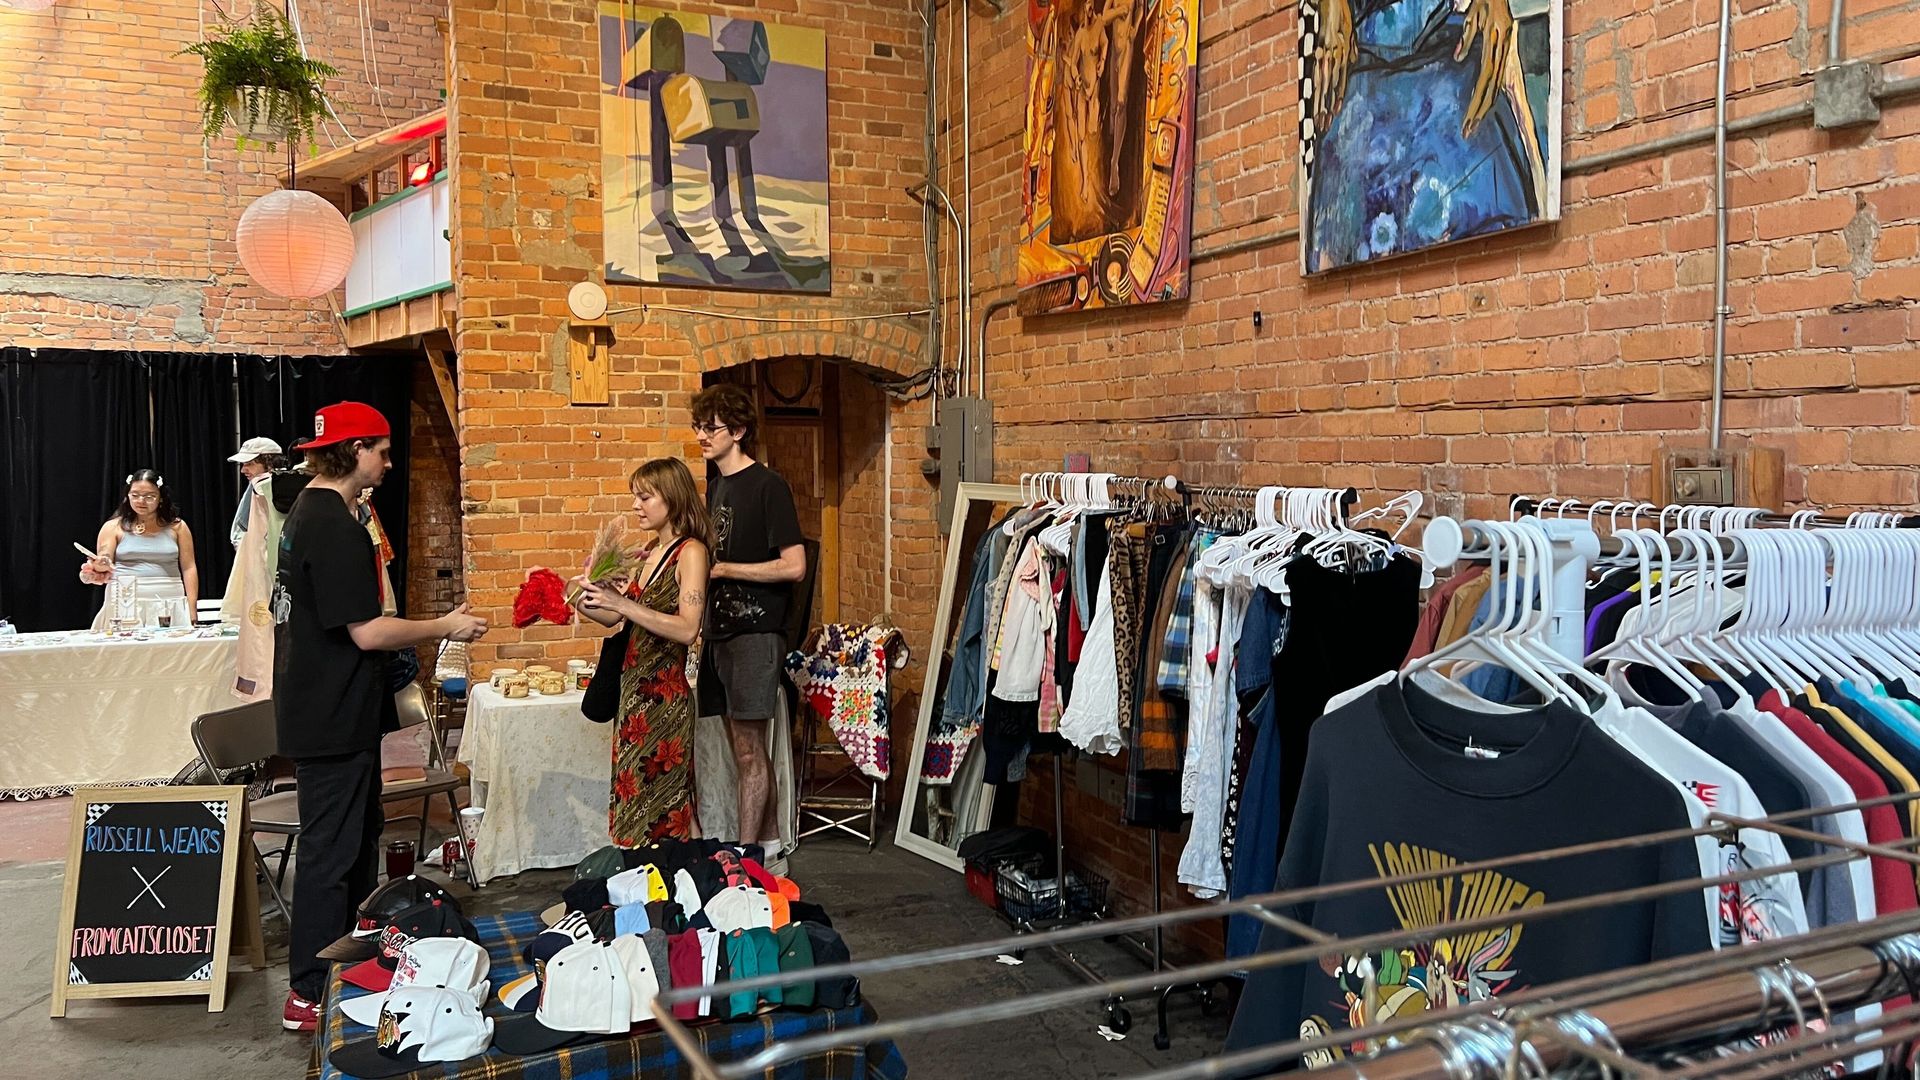 The vintage market last weekend at 7500 Oakland Ave. hosted by Mean Red Productions